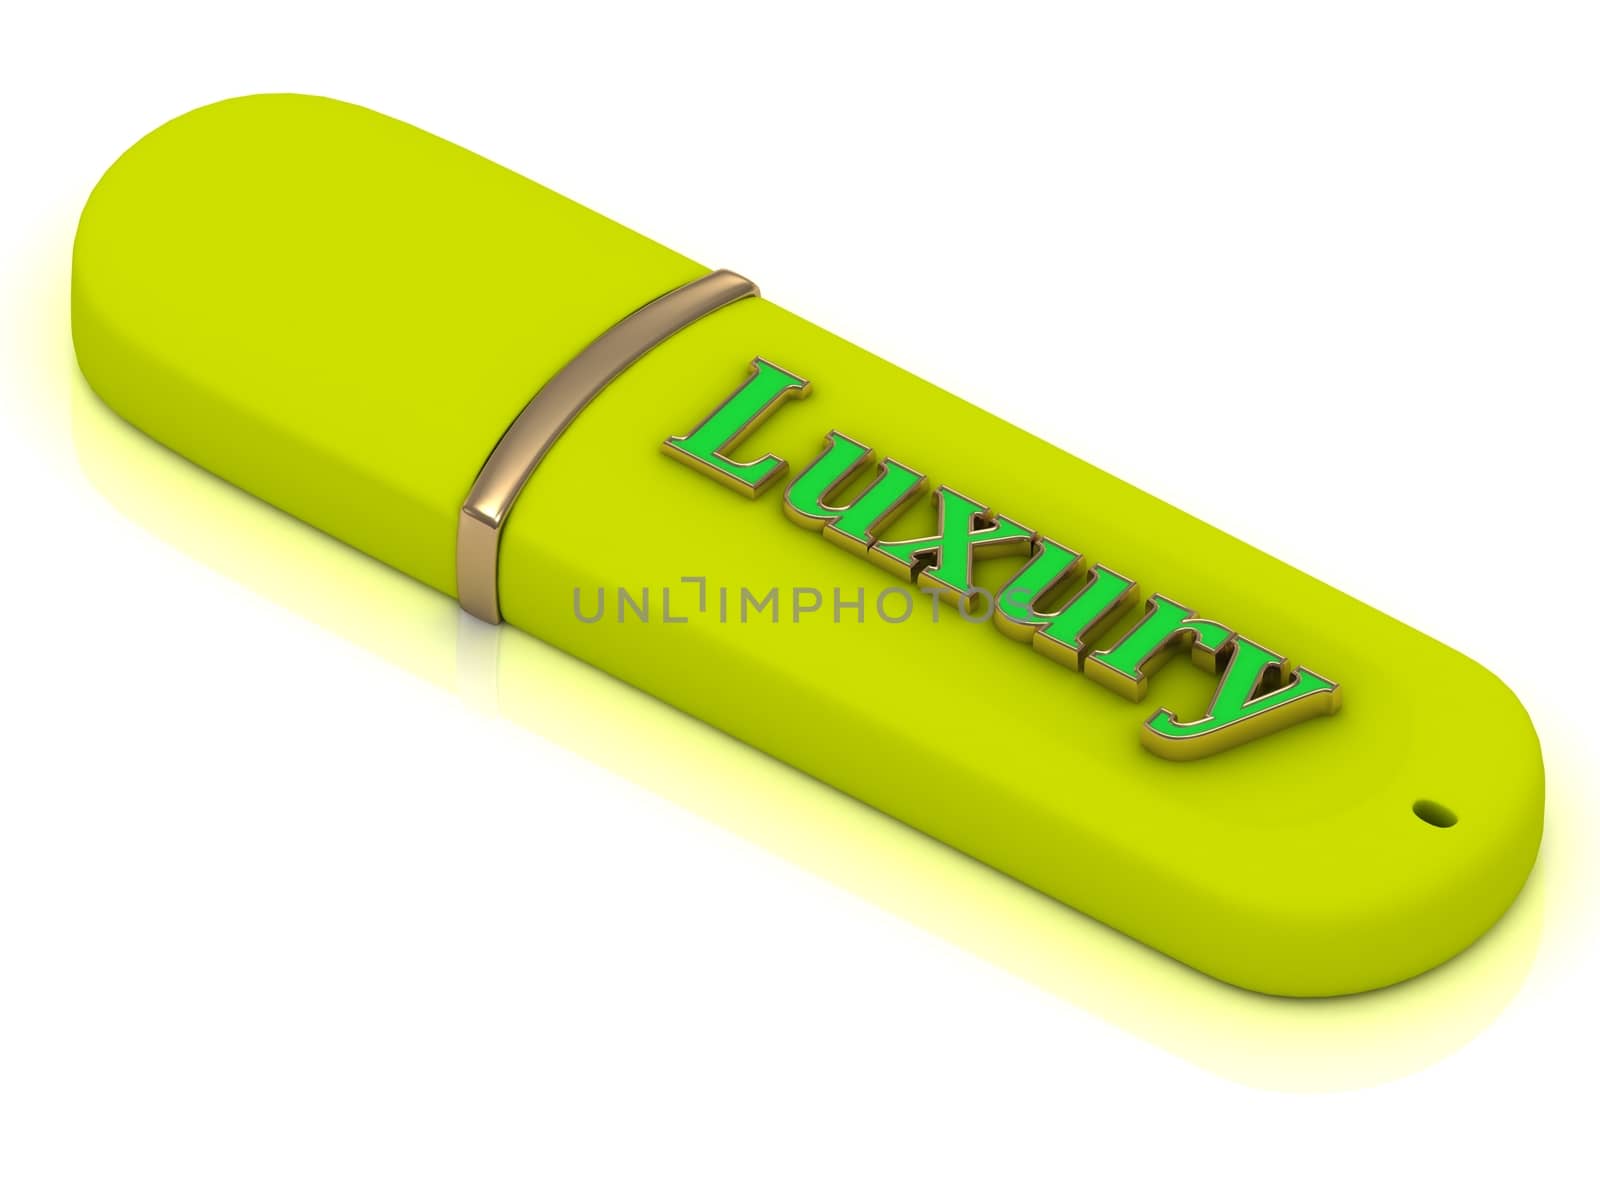 Luxury - volume letter on yellow USB flash drive by GreenMost